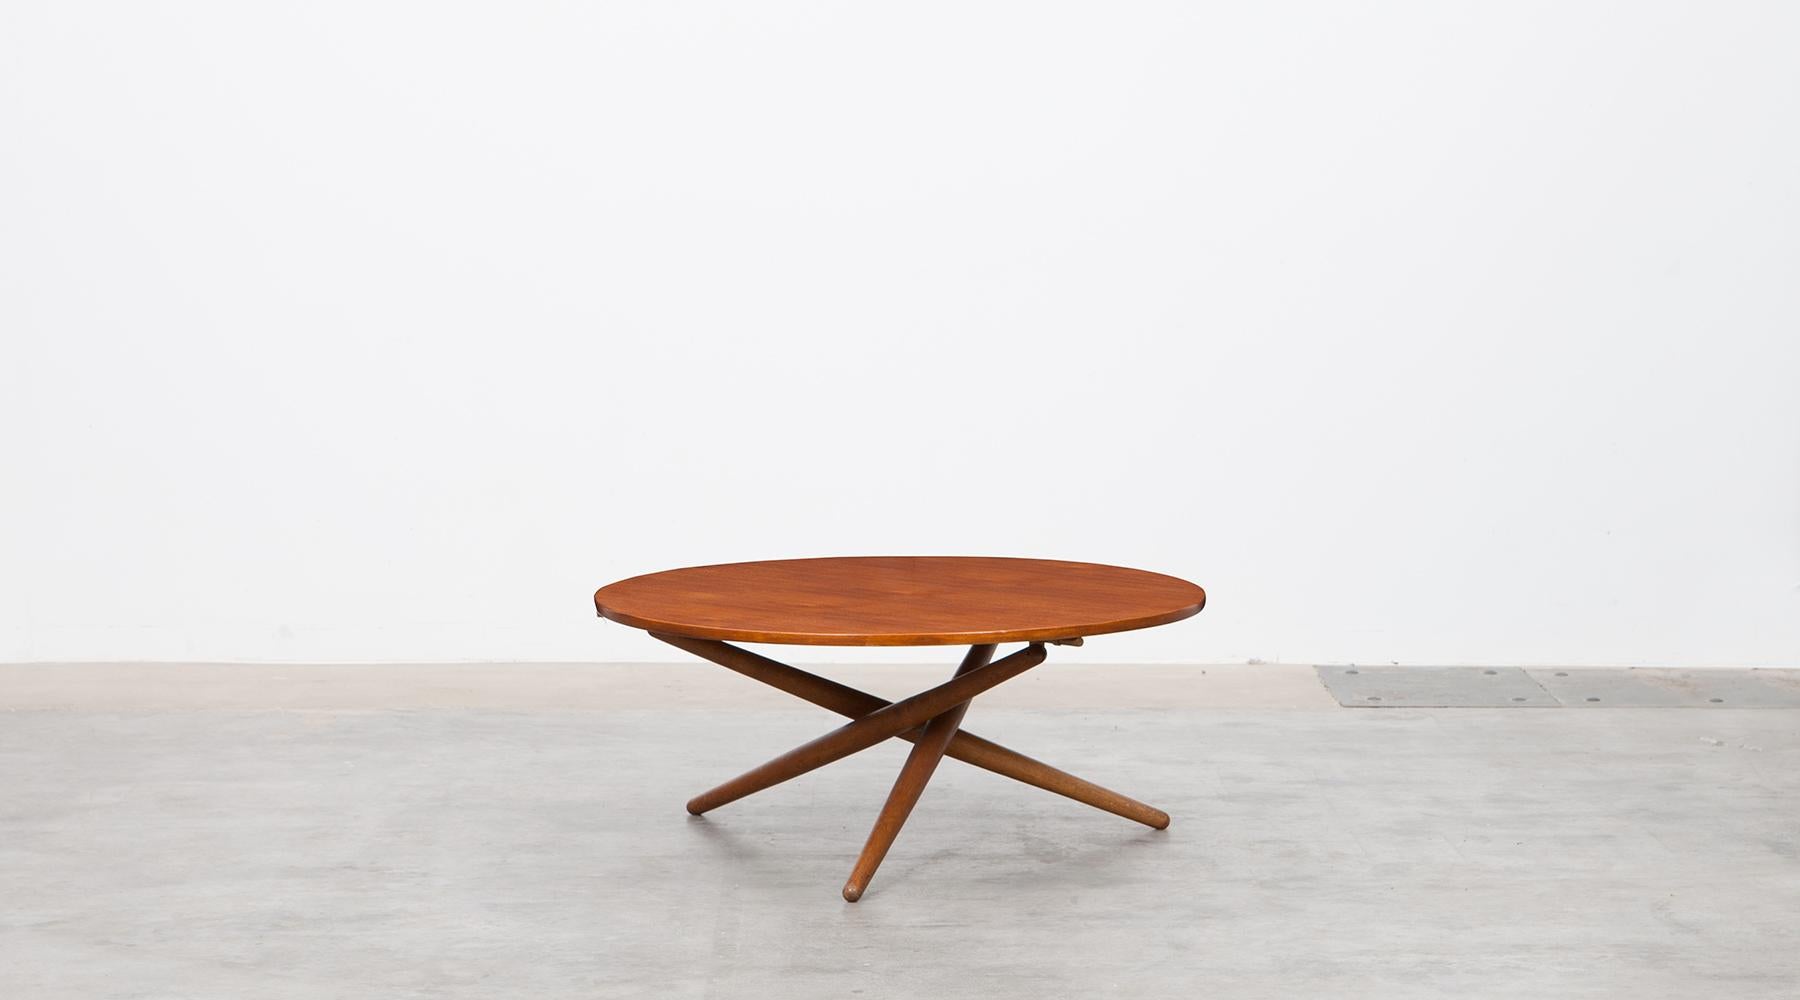 Eat and tea table with tabletop in teak by Jürg Bally, Switzerland, 1951.

Iconic slim and graceful wooden eat and tea table by Swiss Jürg Bally from 1951. Teak tabletop. This model strongly reminds of a 1955 Side Table by US designer T.H.